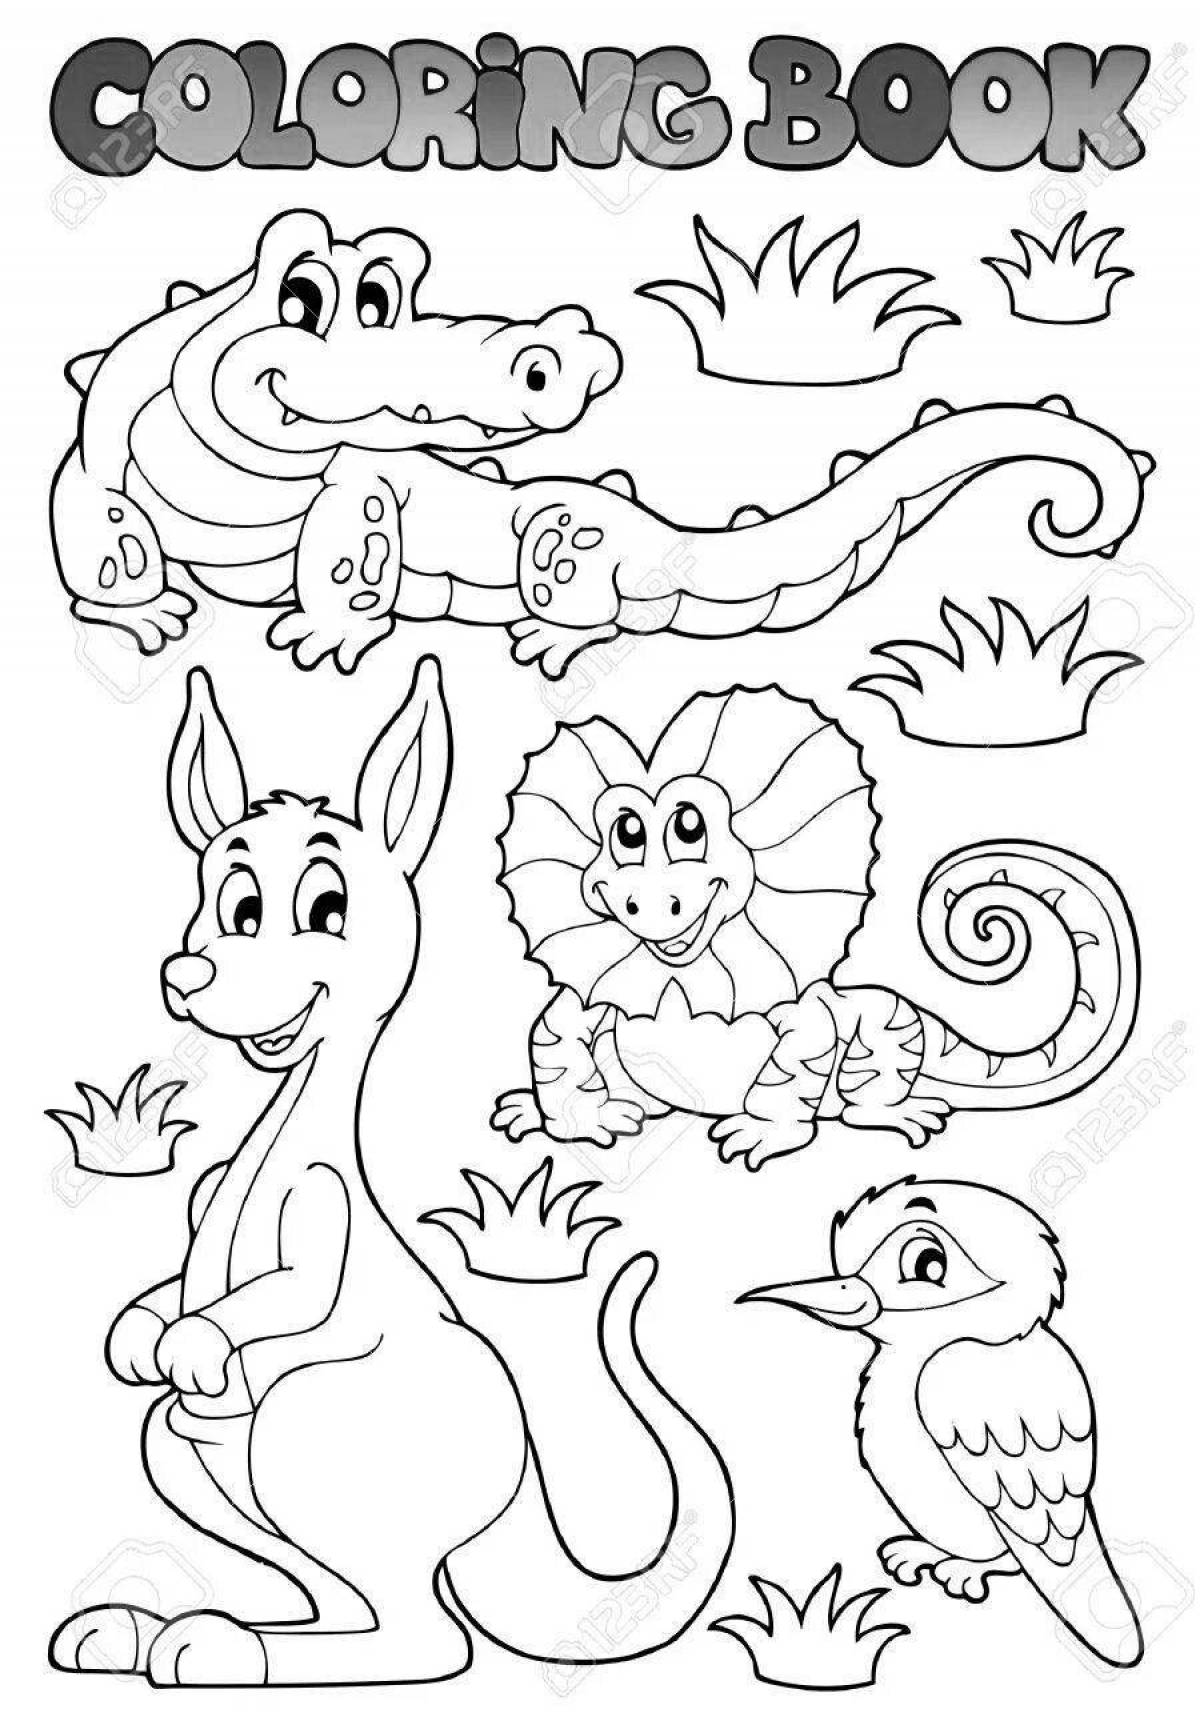 Cute Australian animals coloring book for kids